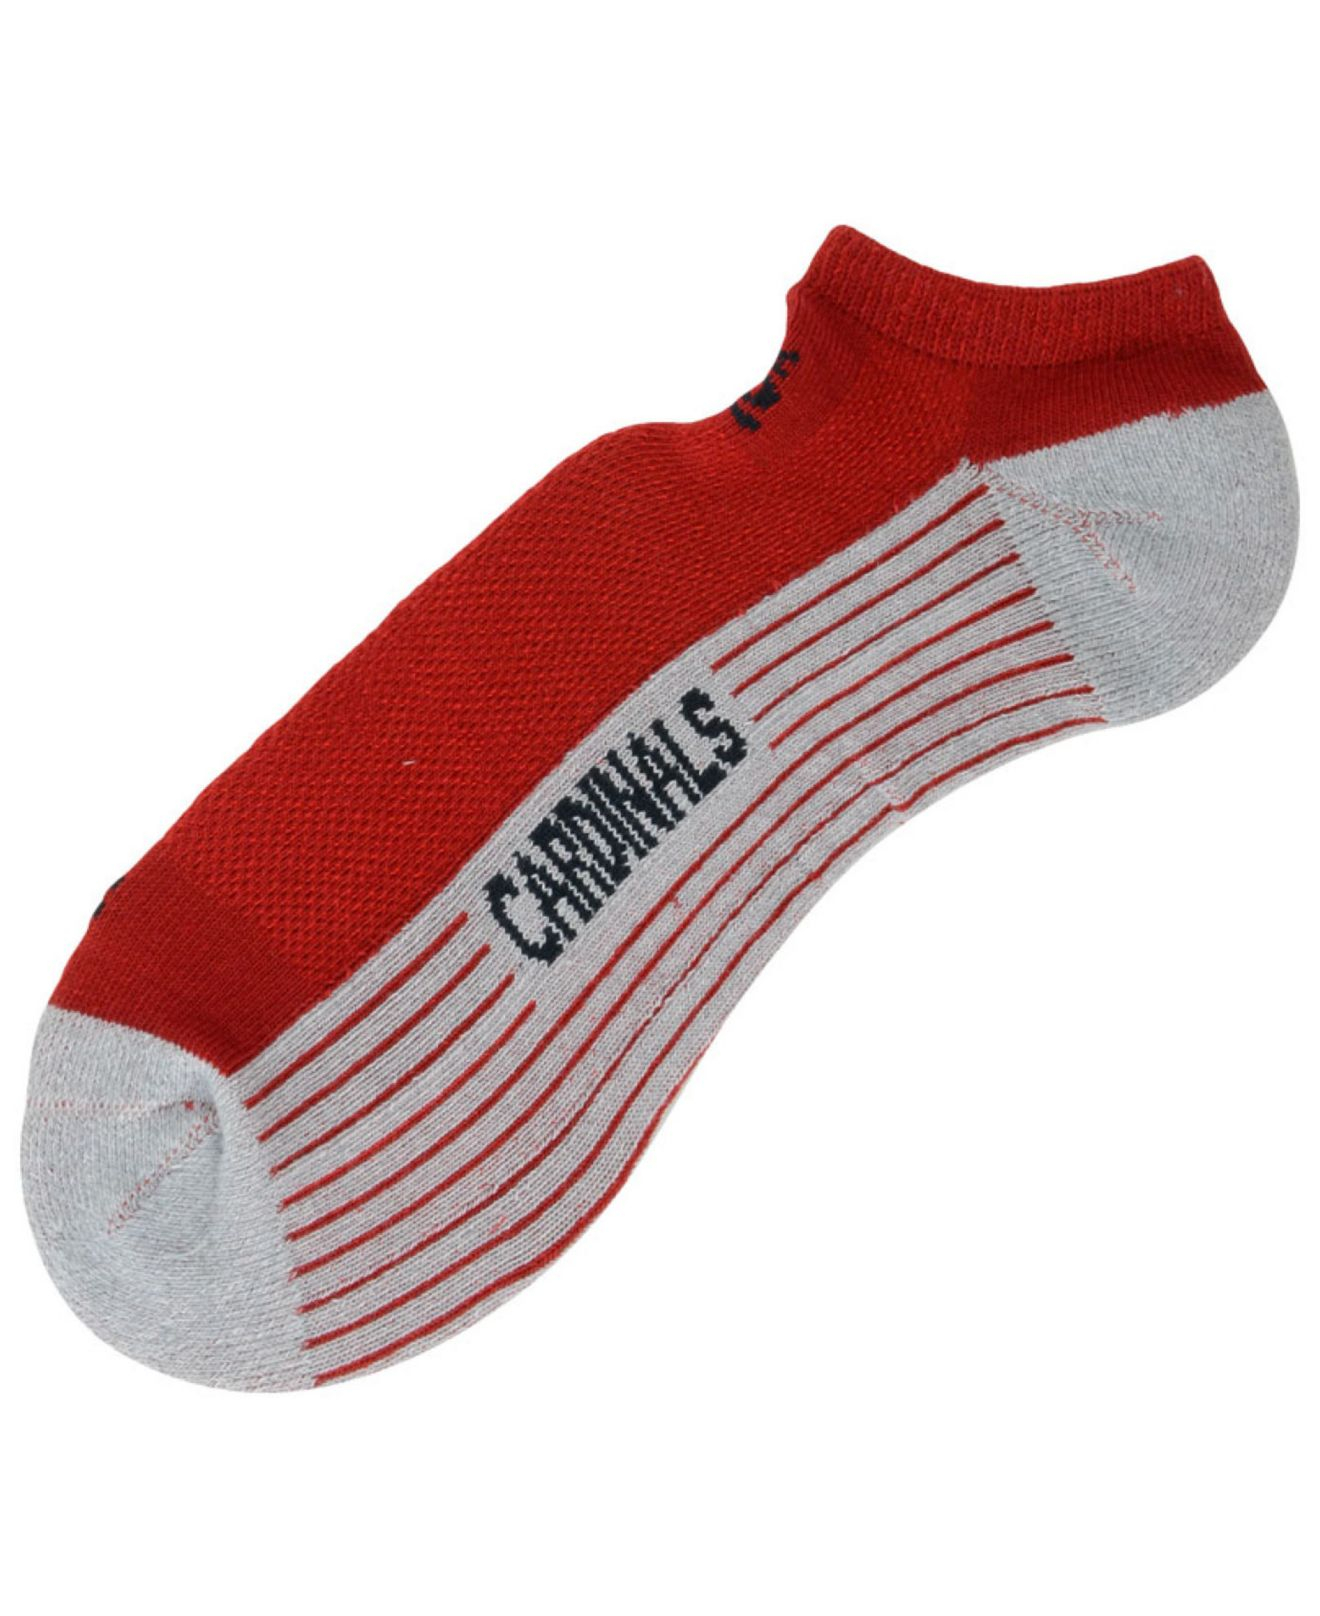 Lyst - 47 Brand St. Louis Cardinals 3-pack No-show Socks in Red for Men